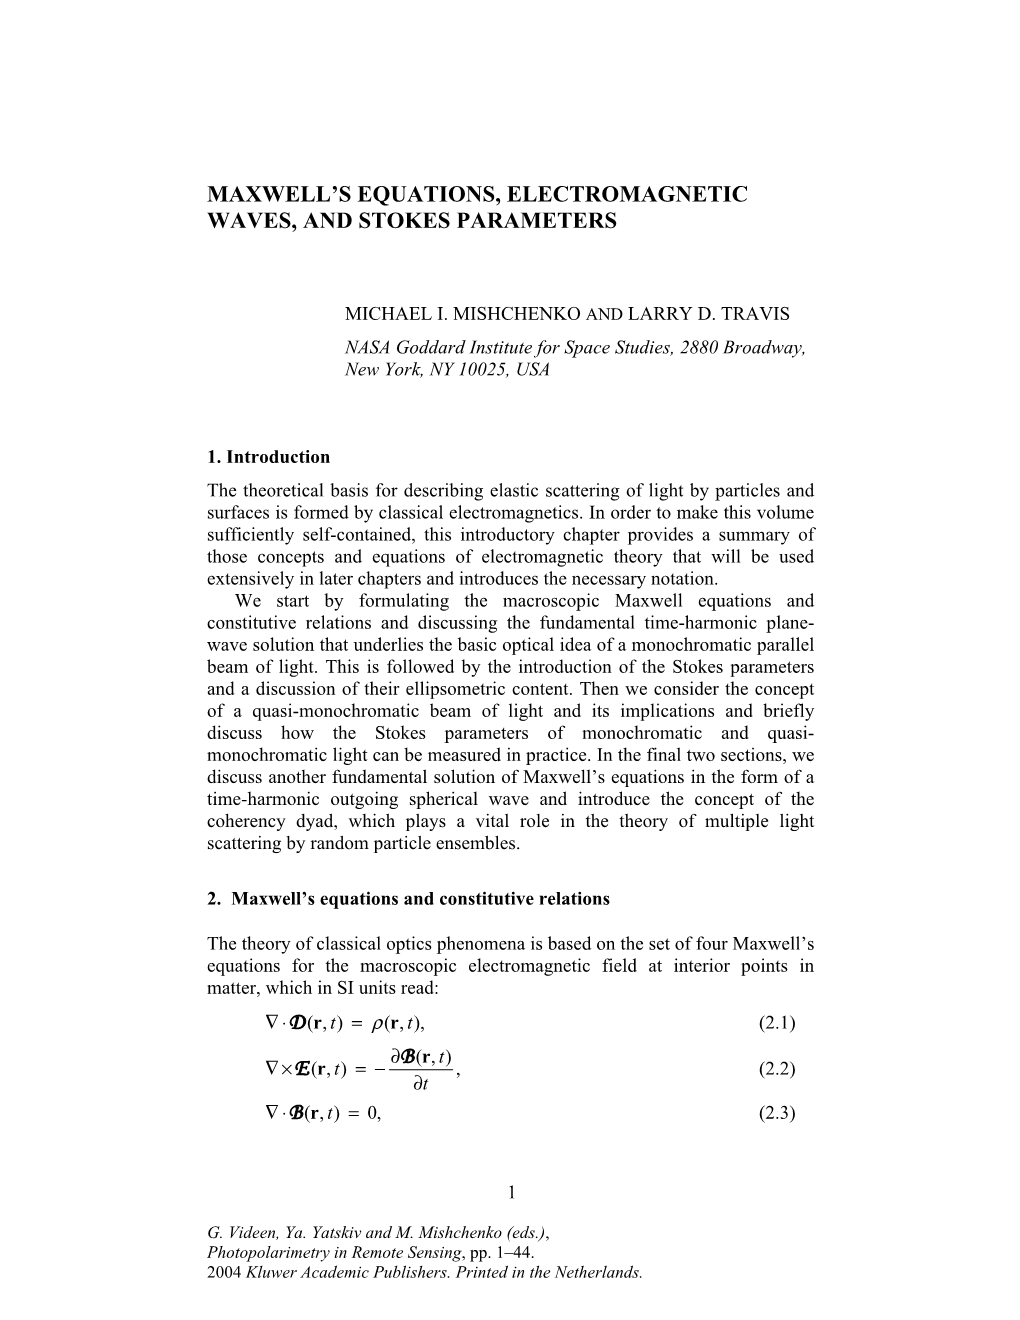 Maxwell's Equations, Electromagnetic Waves, and Stokes Parameters B